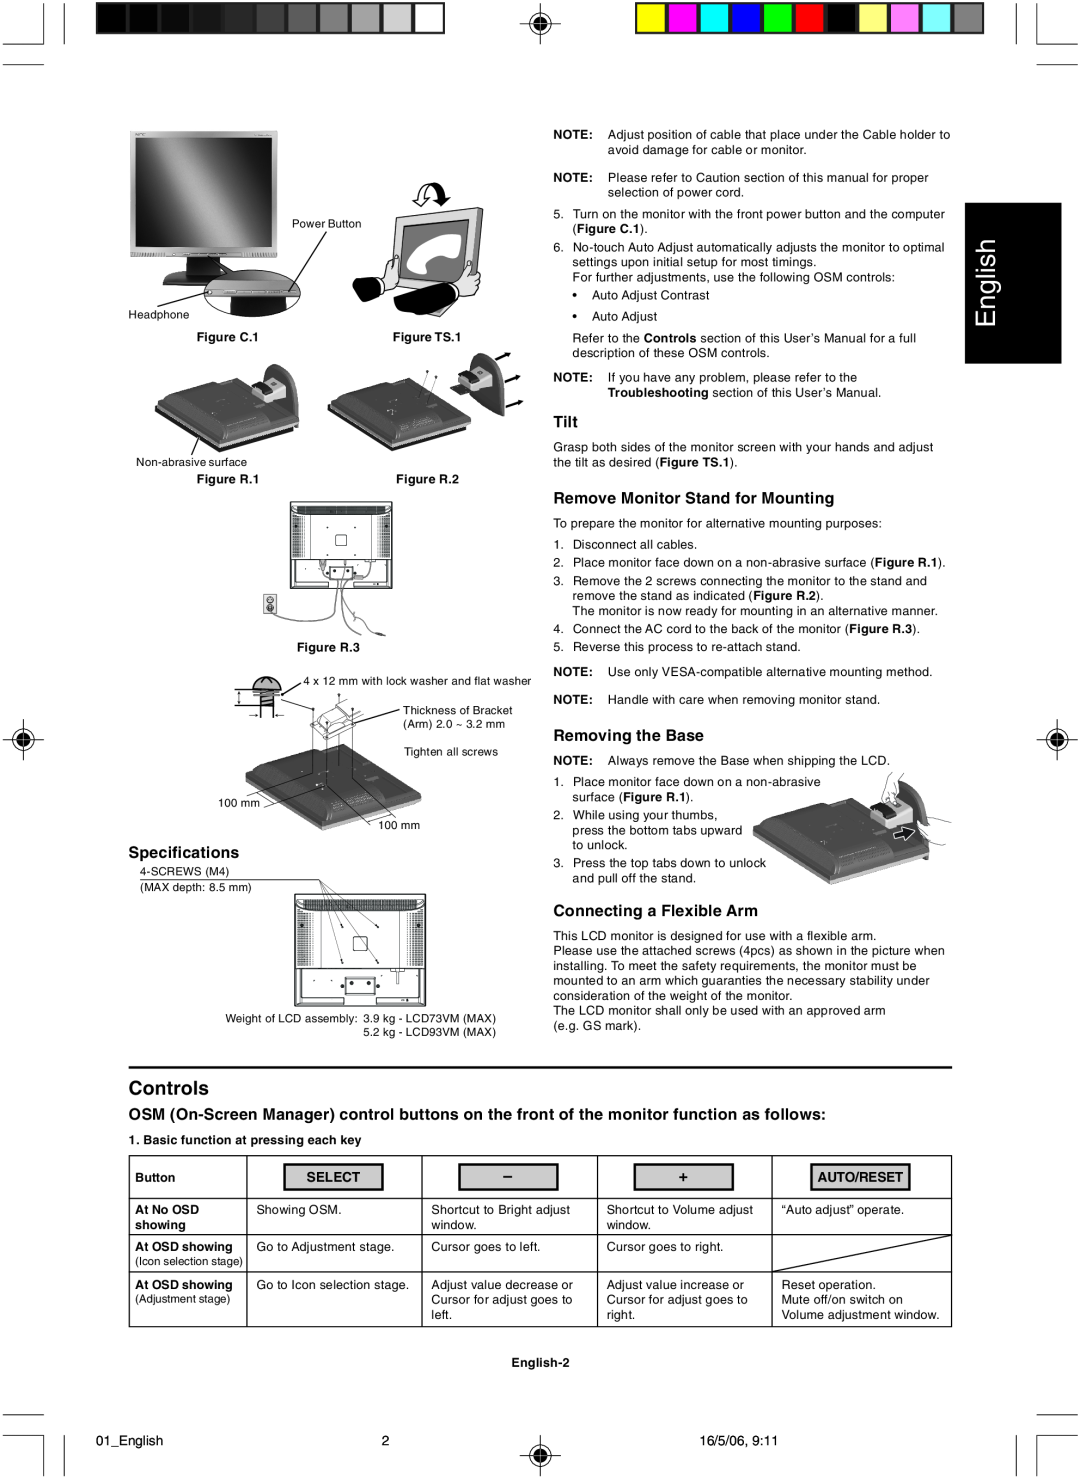 NEC LCD73VM Controls, English, Specifications, Tilt, Remove Monitor Stand for Mounting, Removing the Base, Select 